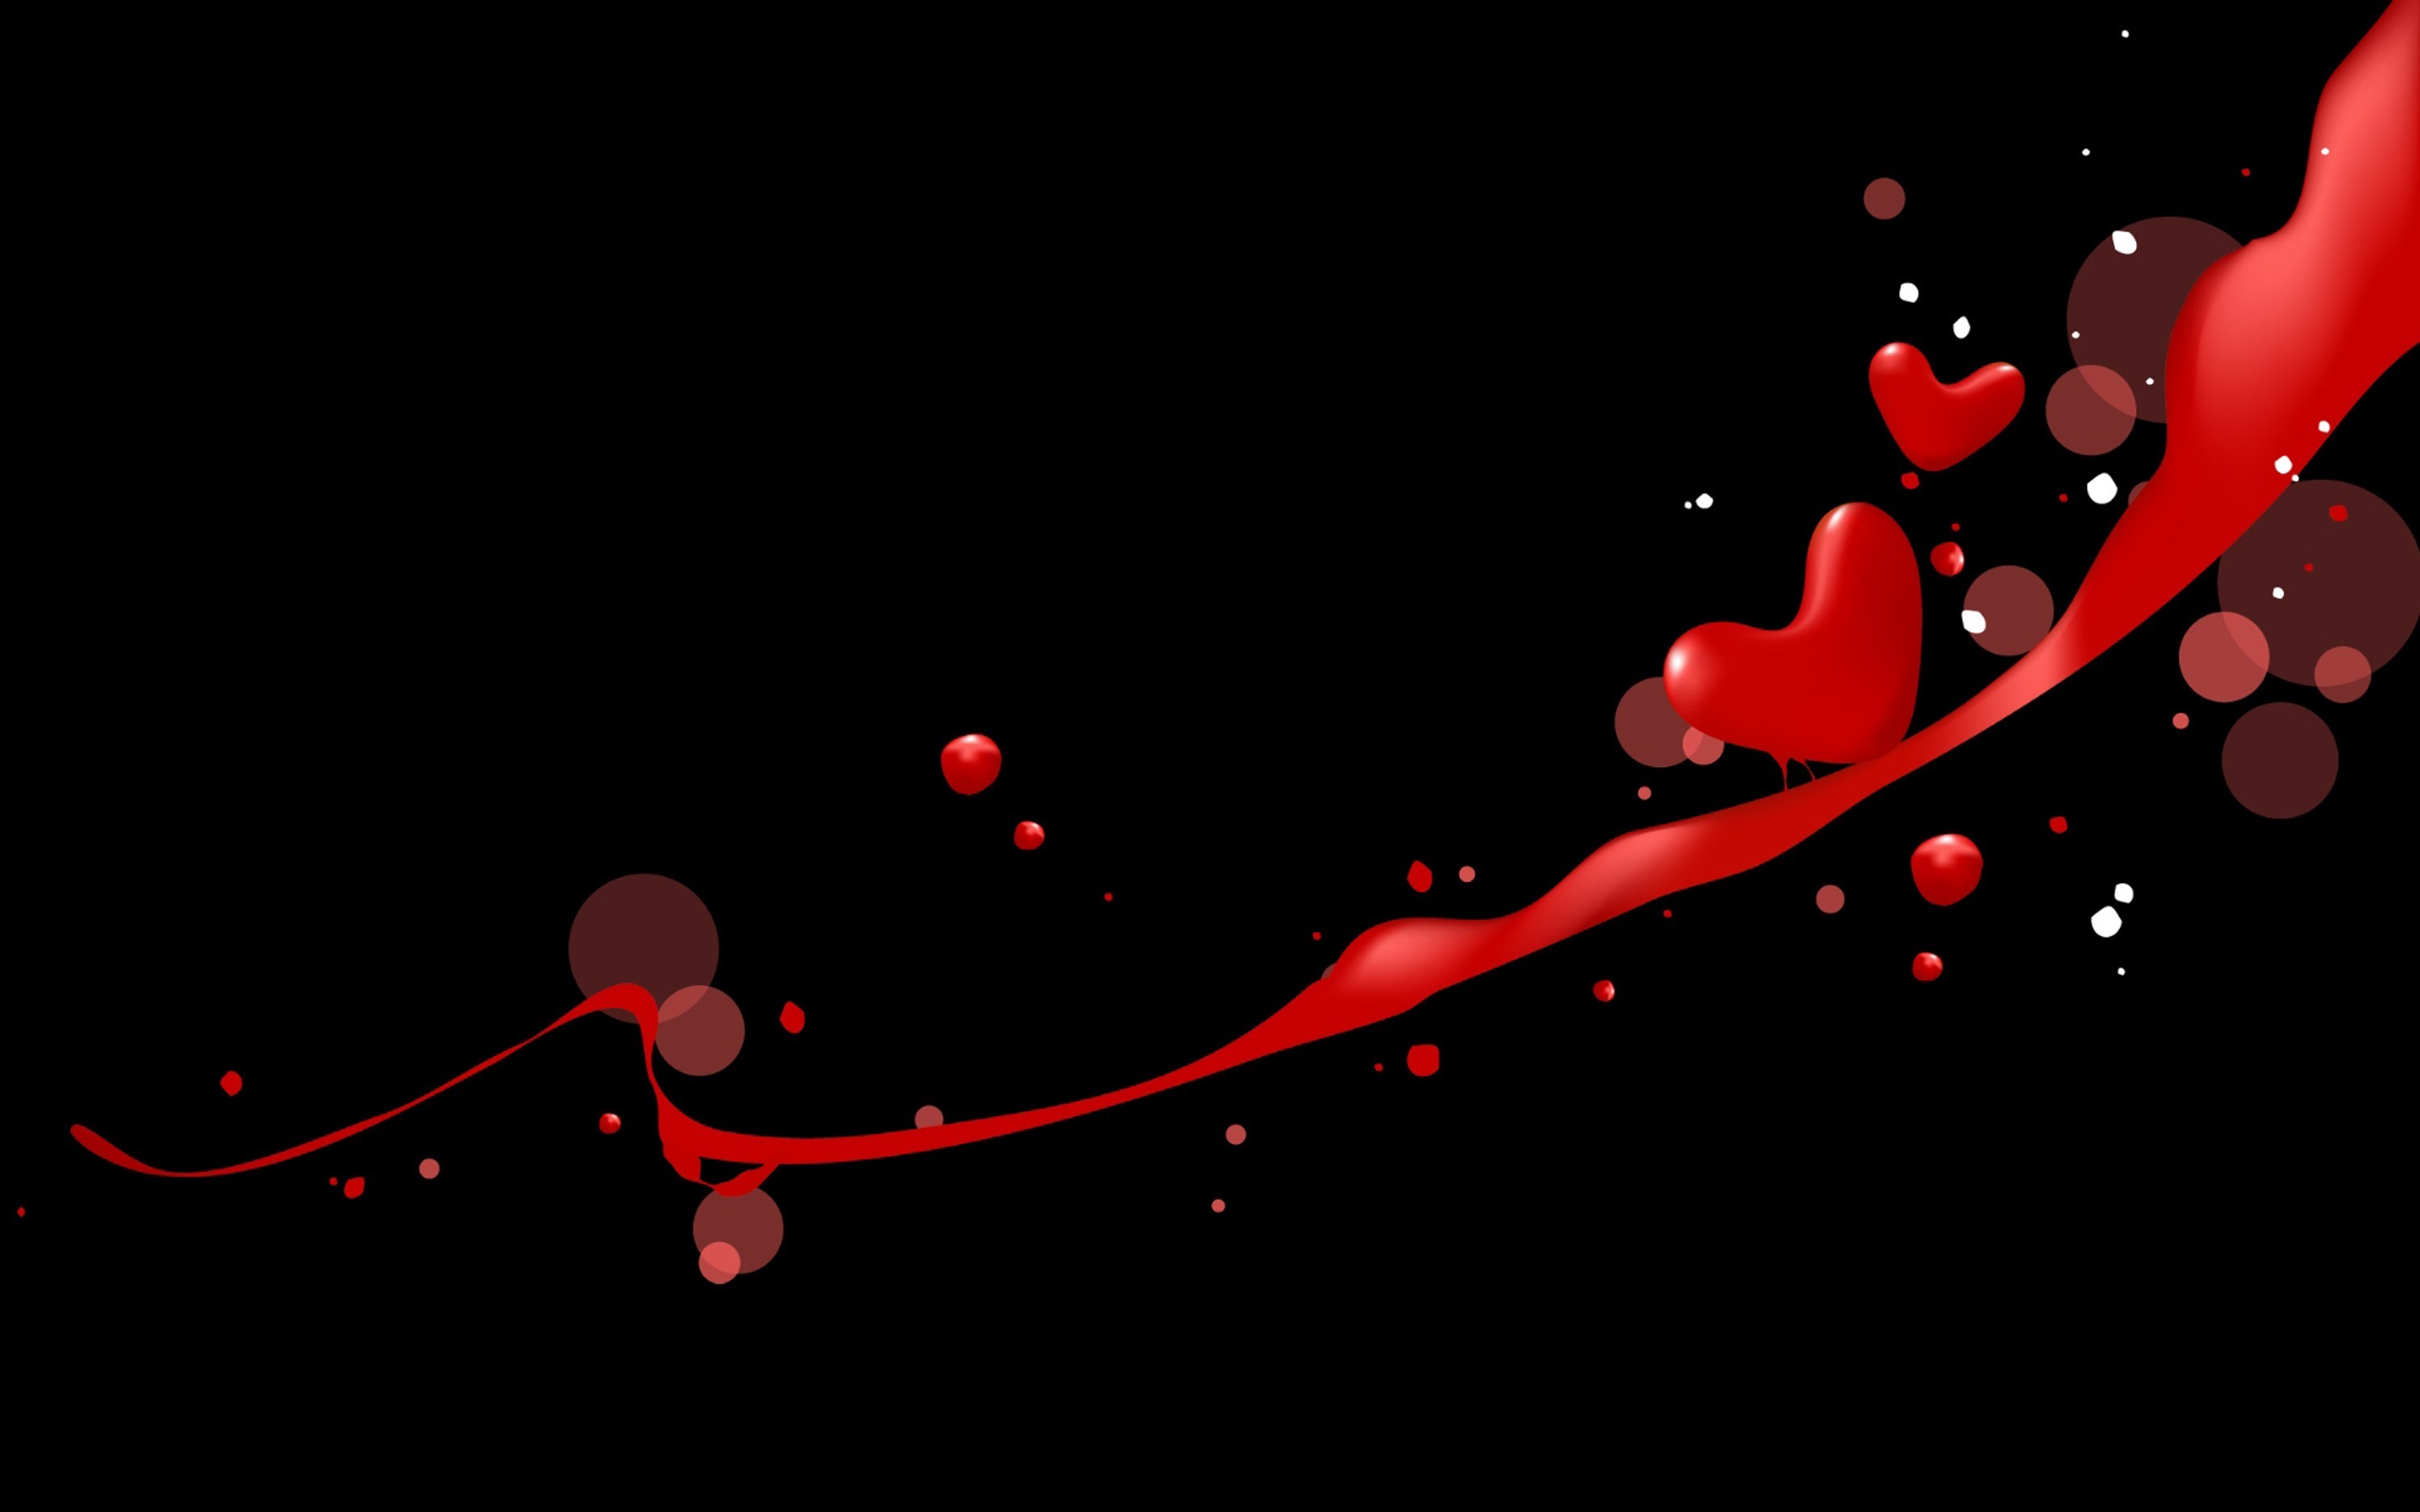 Share 63+ black background red heart wallpaper - in.cdgdbentre